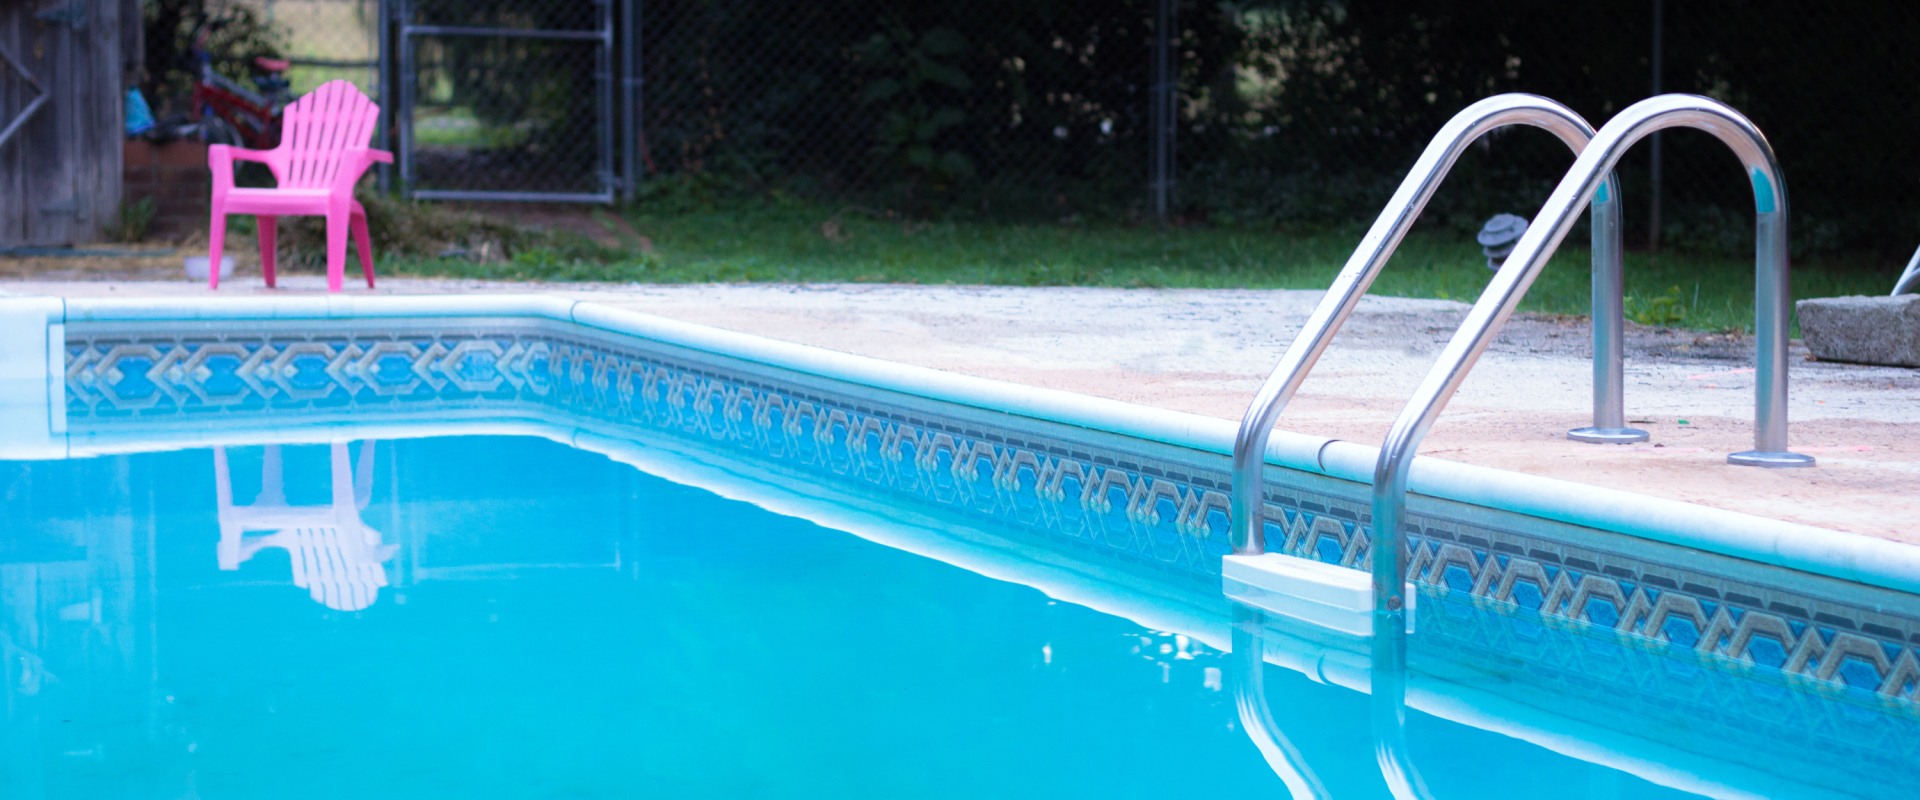 Troubleshooting Calcium Hardness Level Issues in Swimming Pools